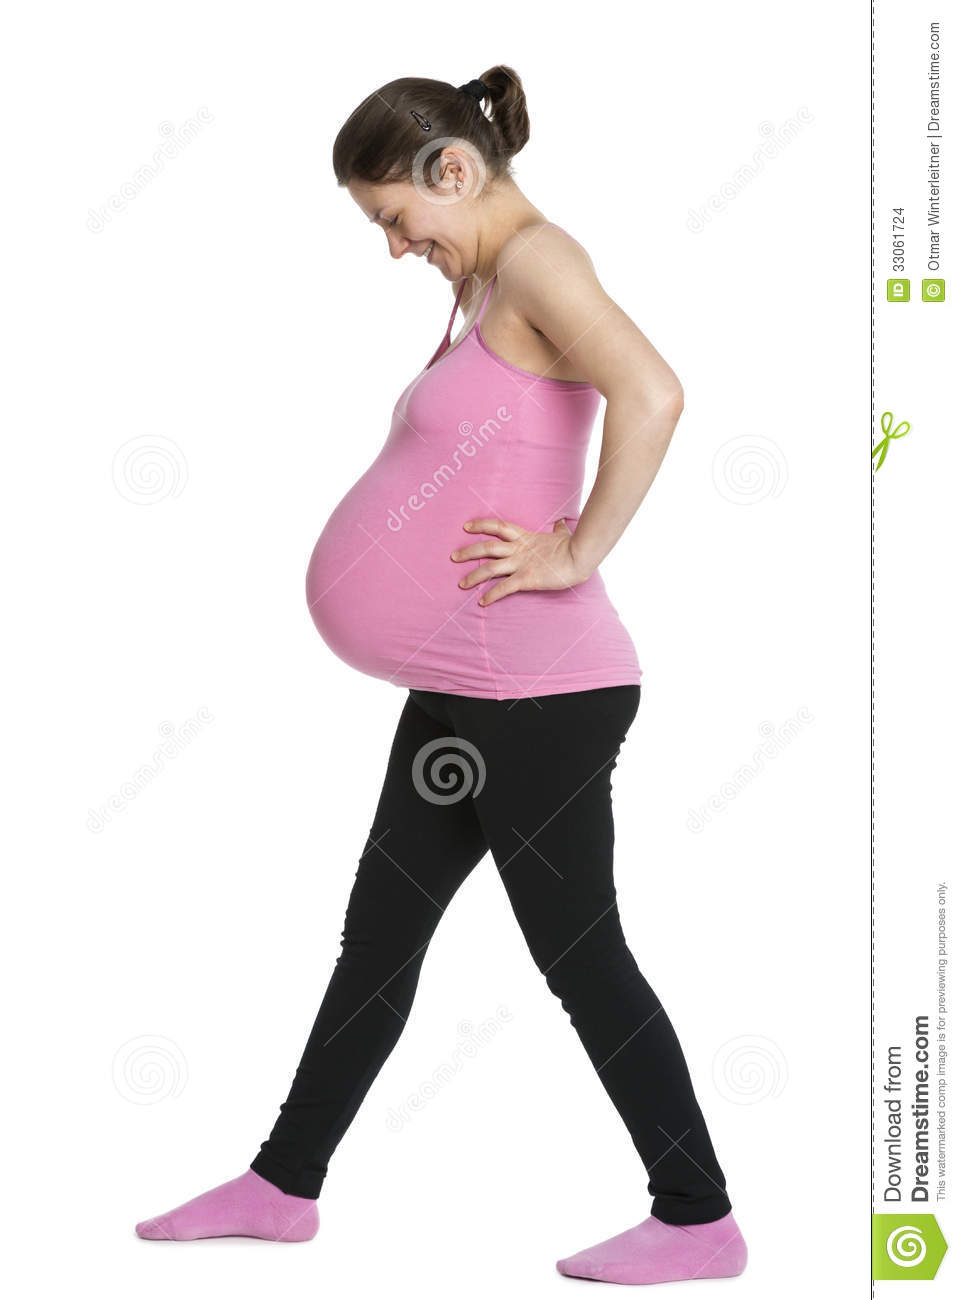 Joyful Pregnant Woman In Pink Undershirt With Hands On Hips Looking At